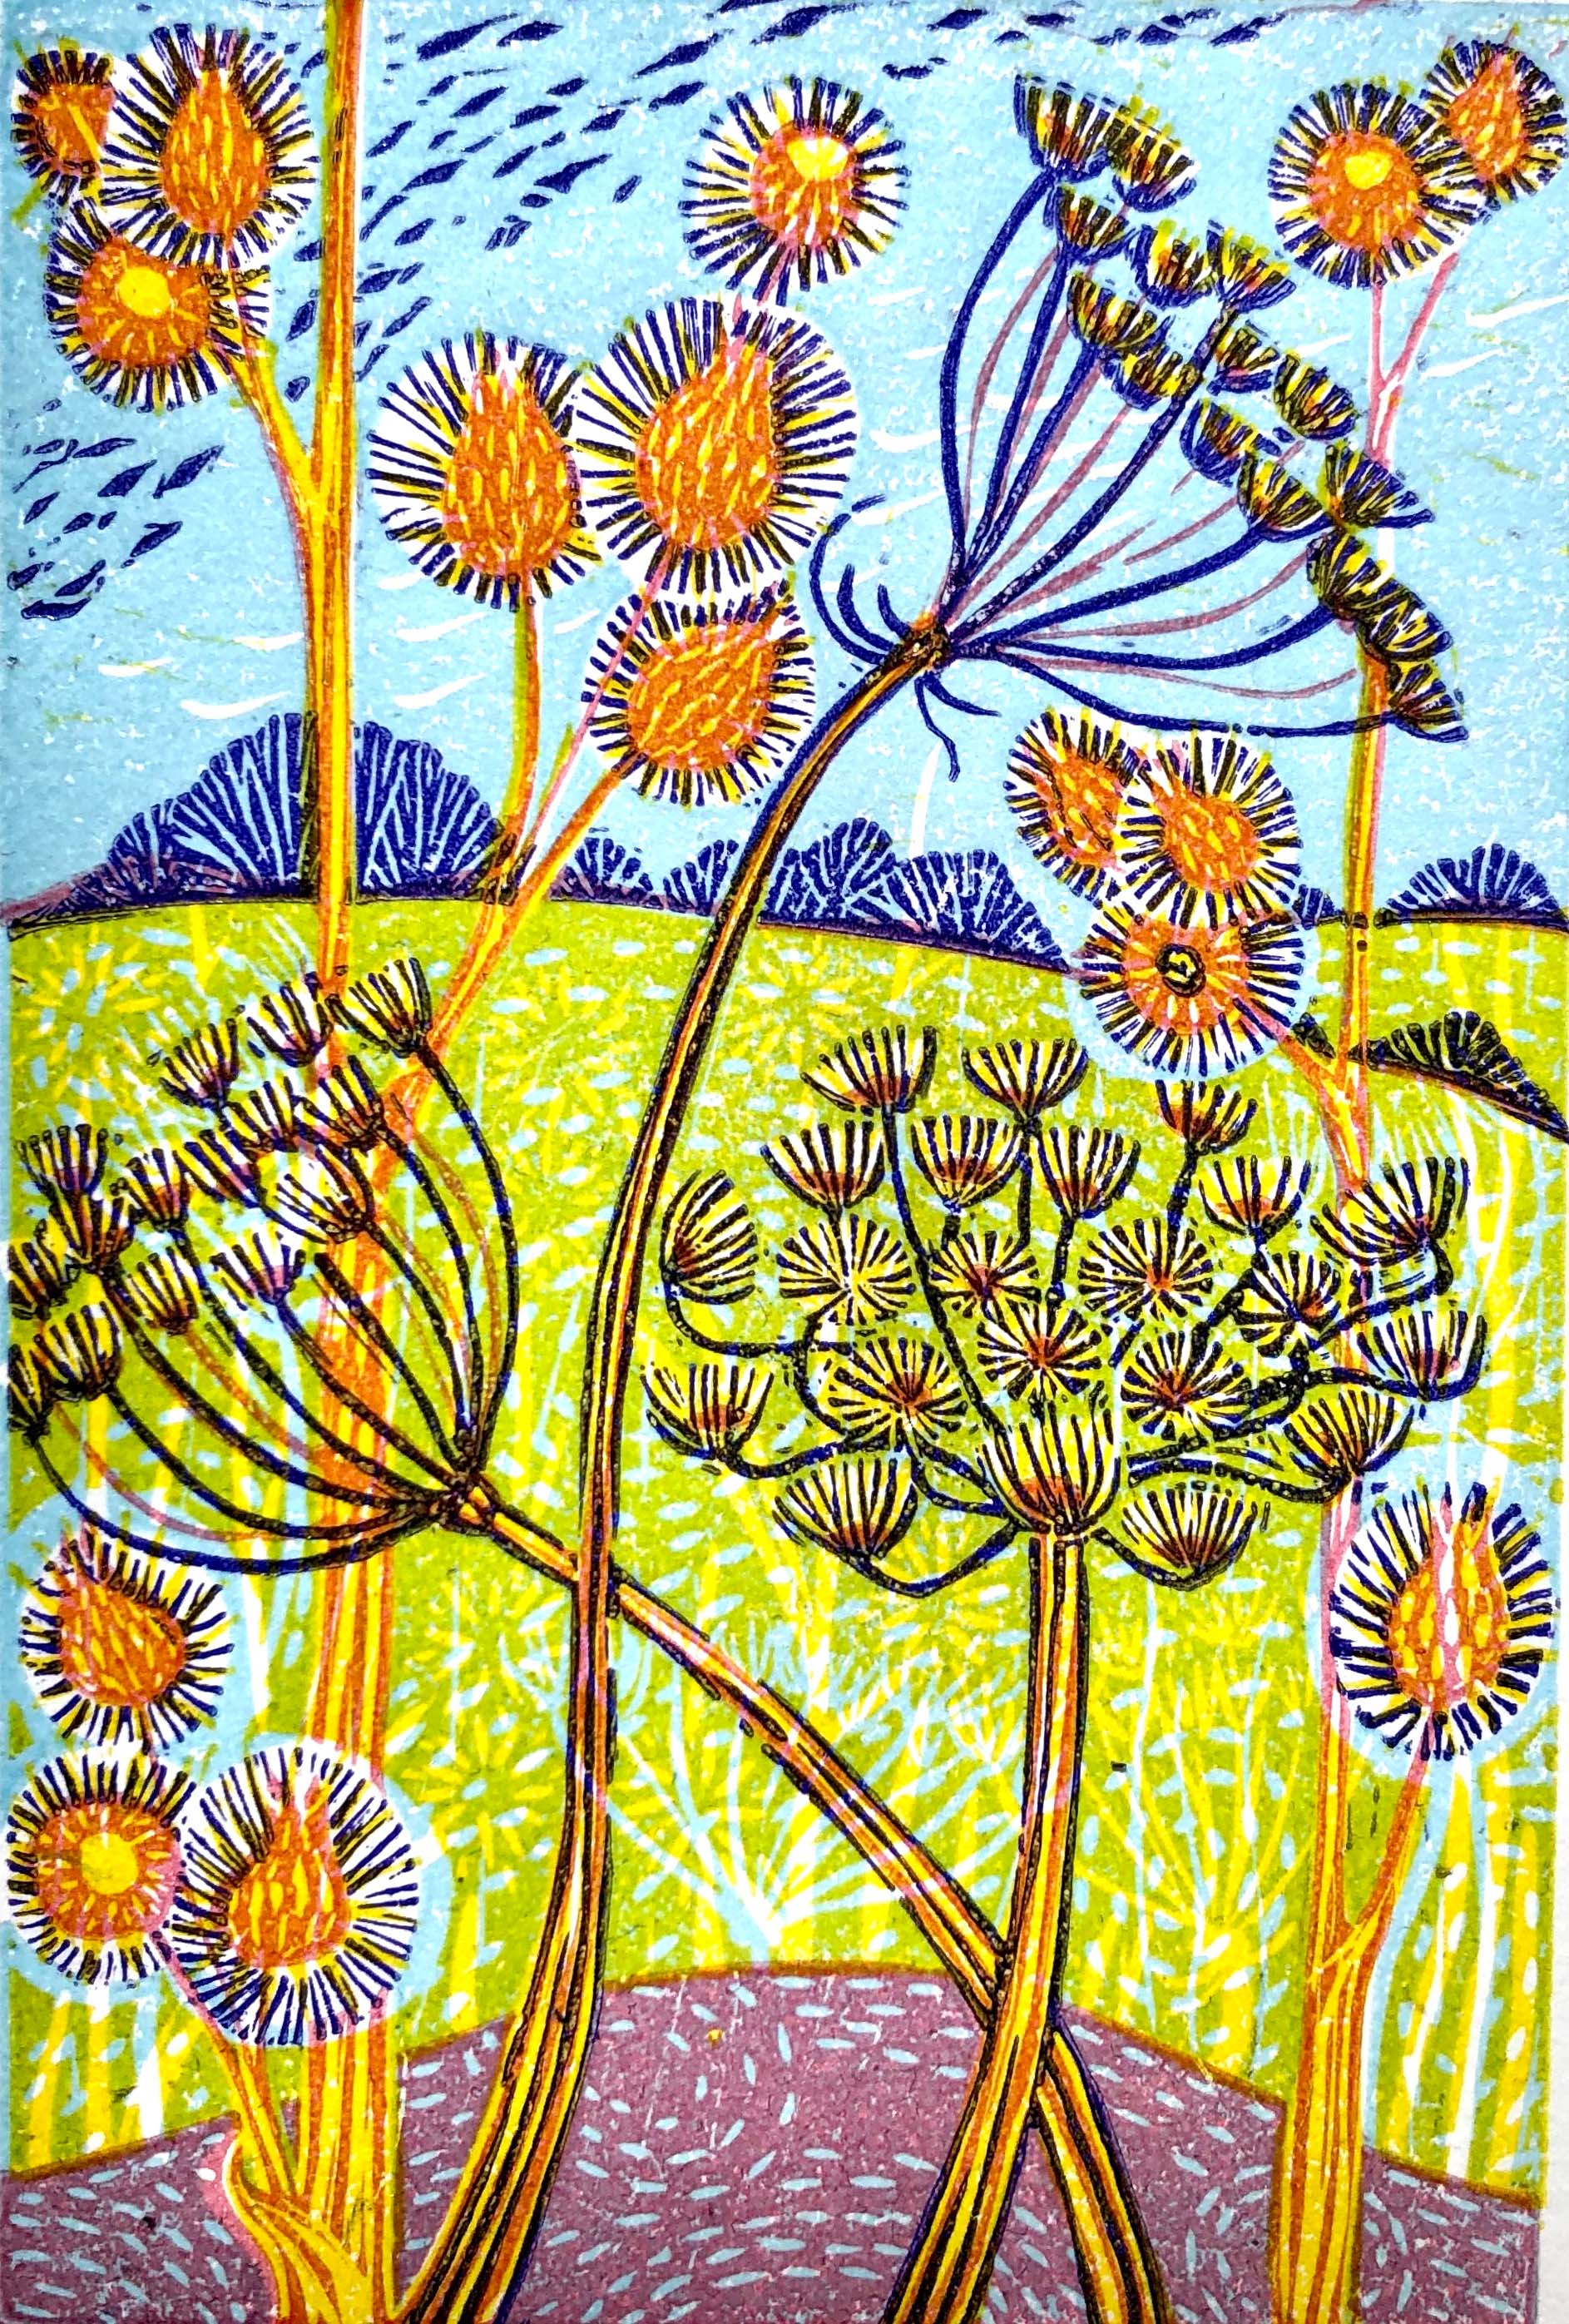 Limited edition lino print by print artist Claire Armitage